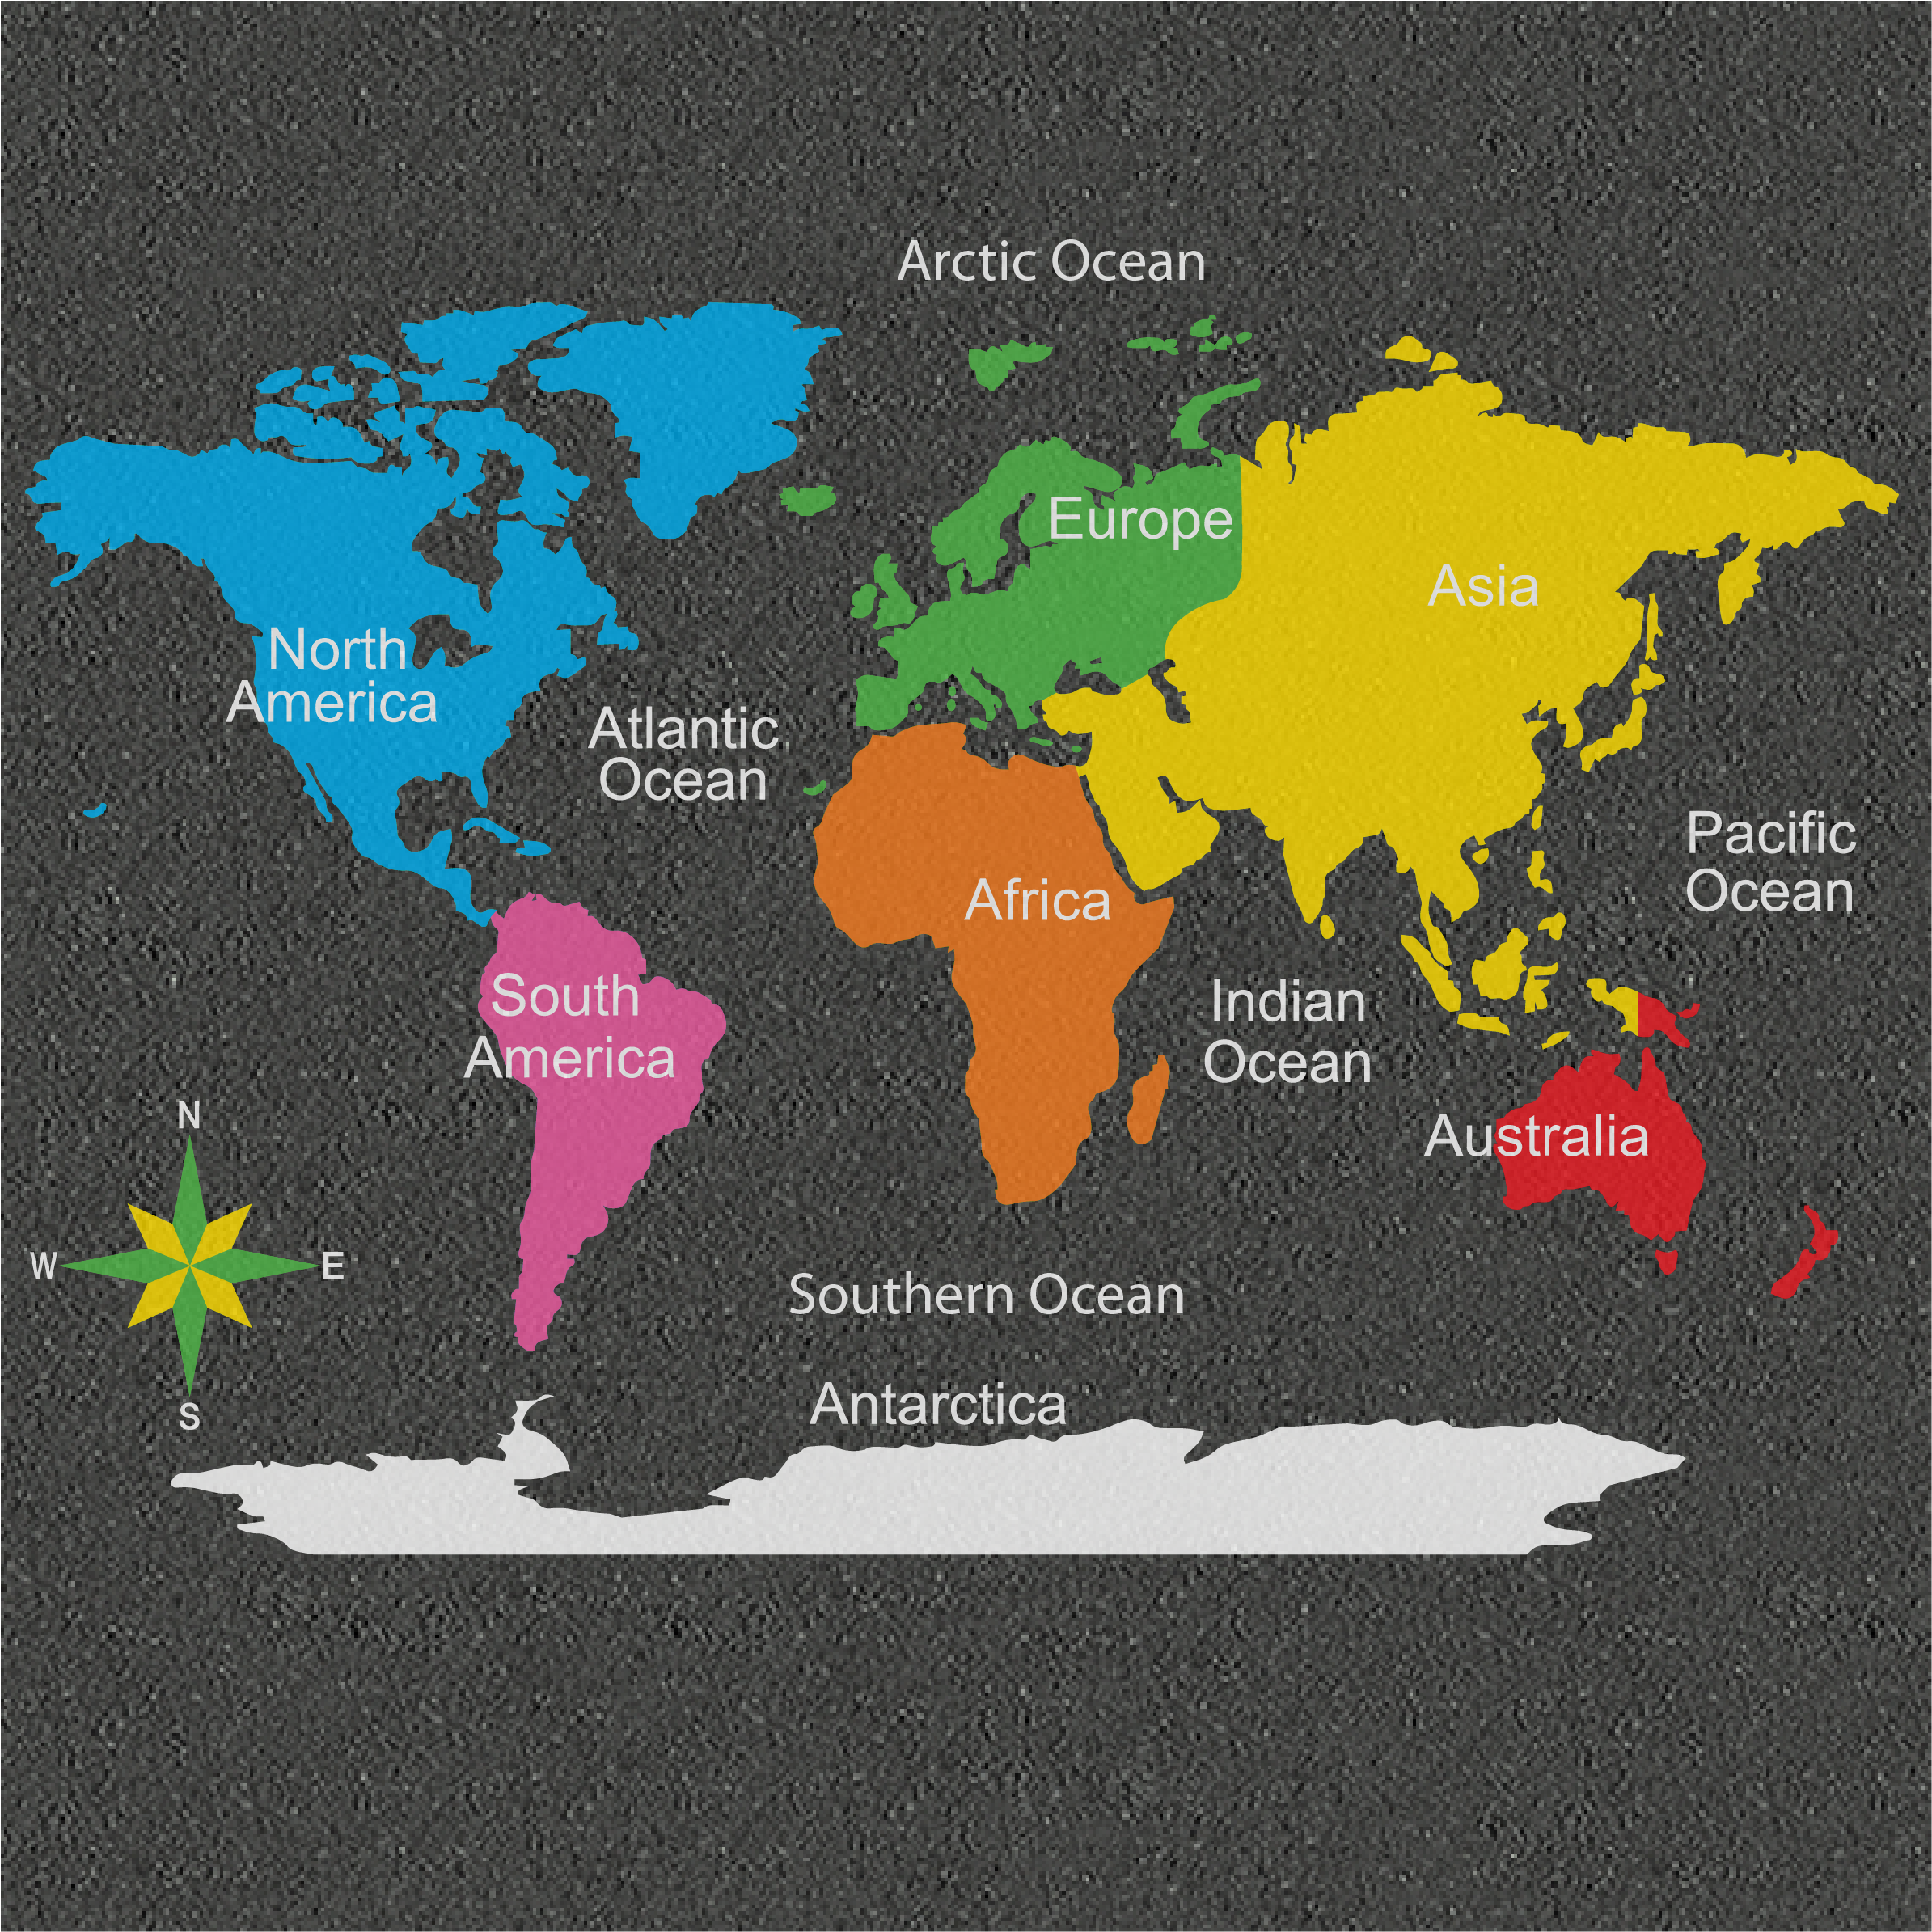 continents-on-the-world-map